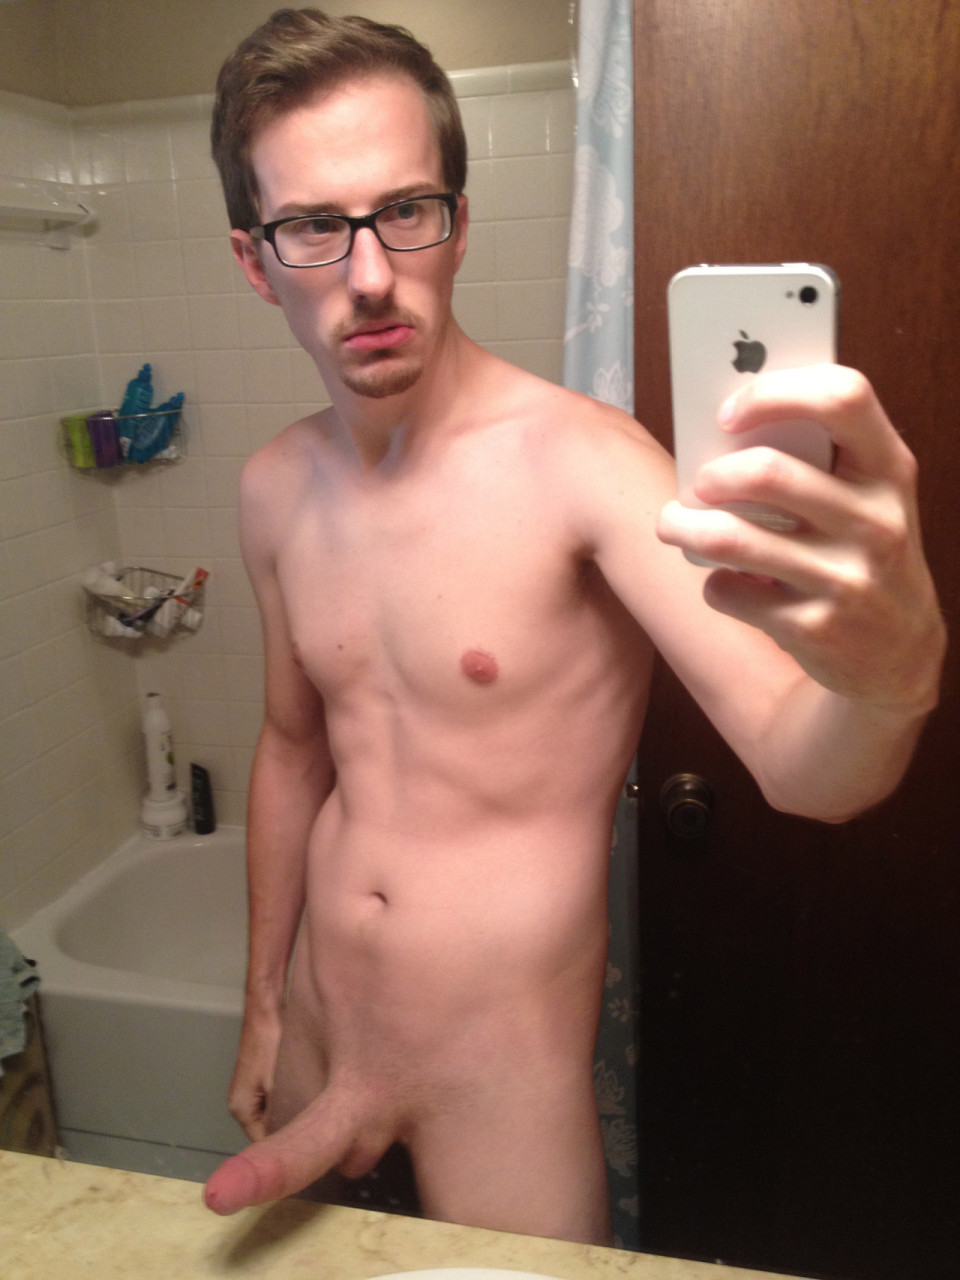 Nude nerdy guys with glasses - Other - Porn Pics